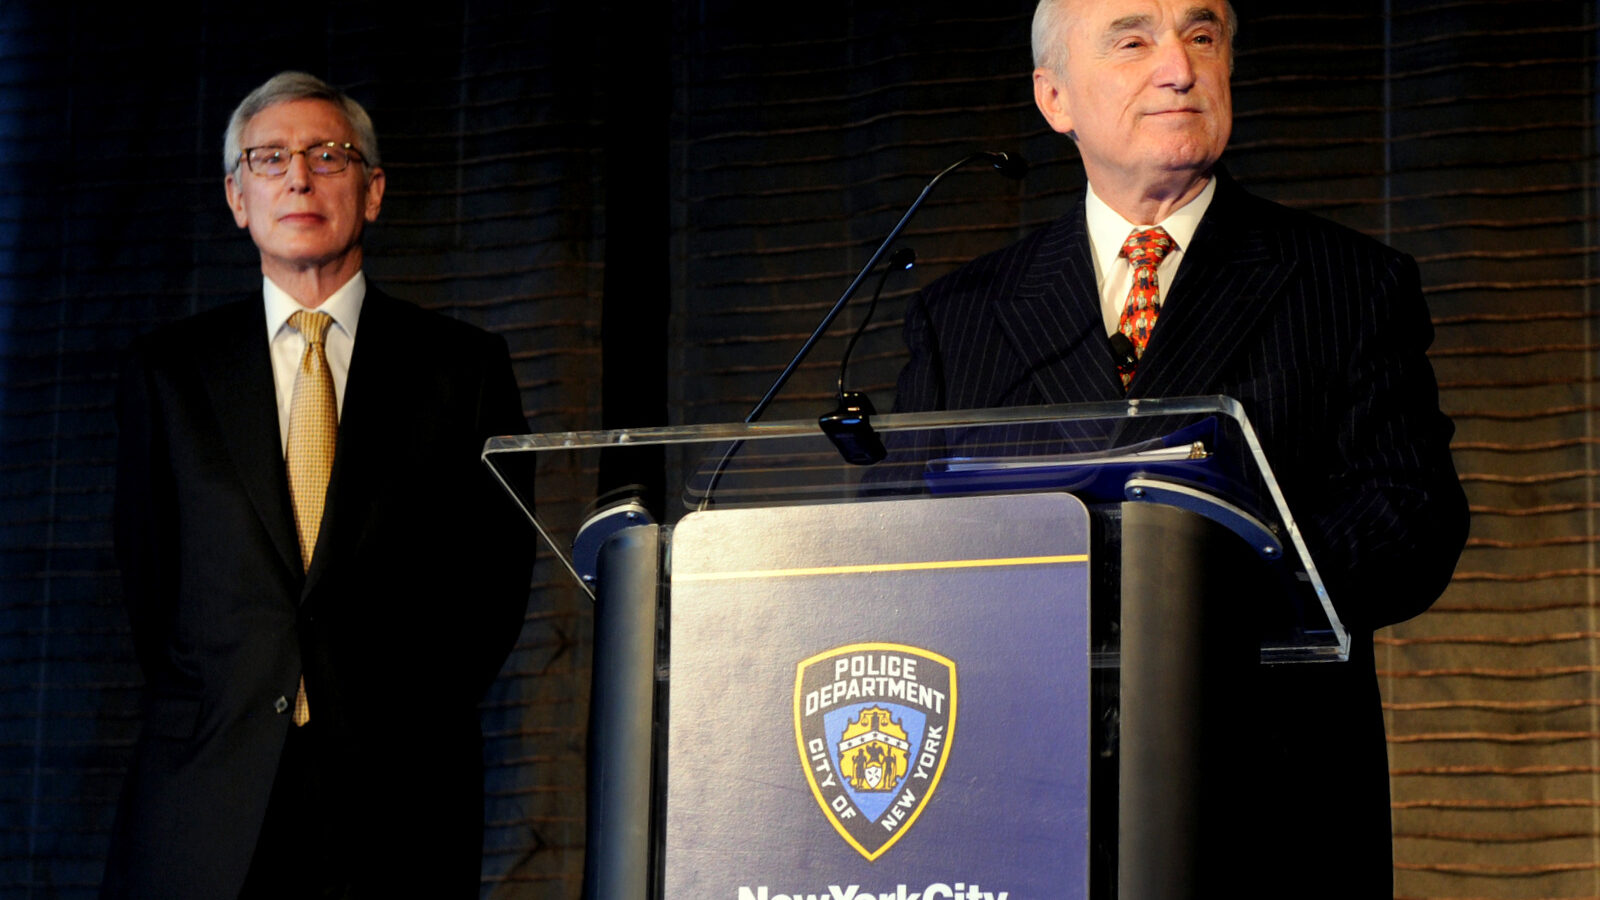 New York City Police Commissioner William J. Bratton, right, joined by H. Dale Hemmerdinger, Chairman of the Board, New York City Police Foundation, speaks at the Foundation's State of the NYPD breakfast in New York, Thursday, Jan. 29, 2015.